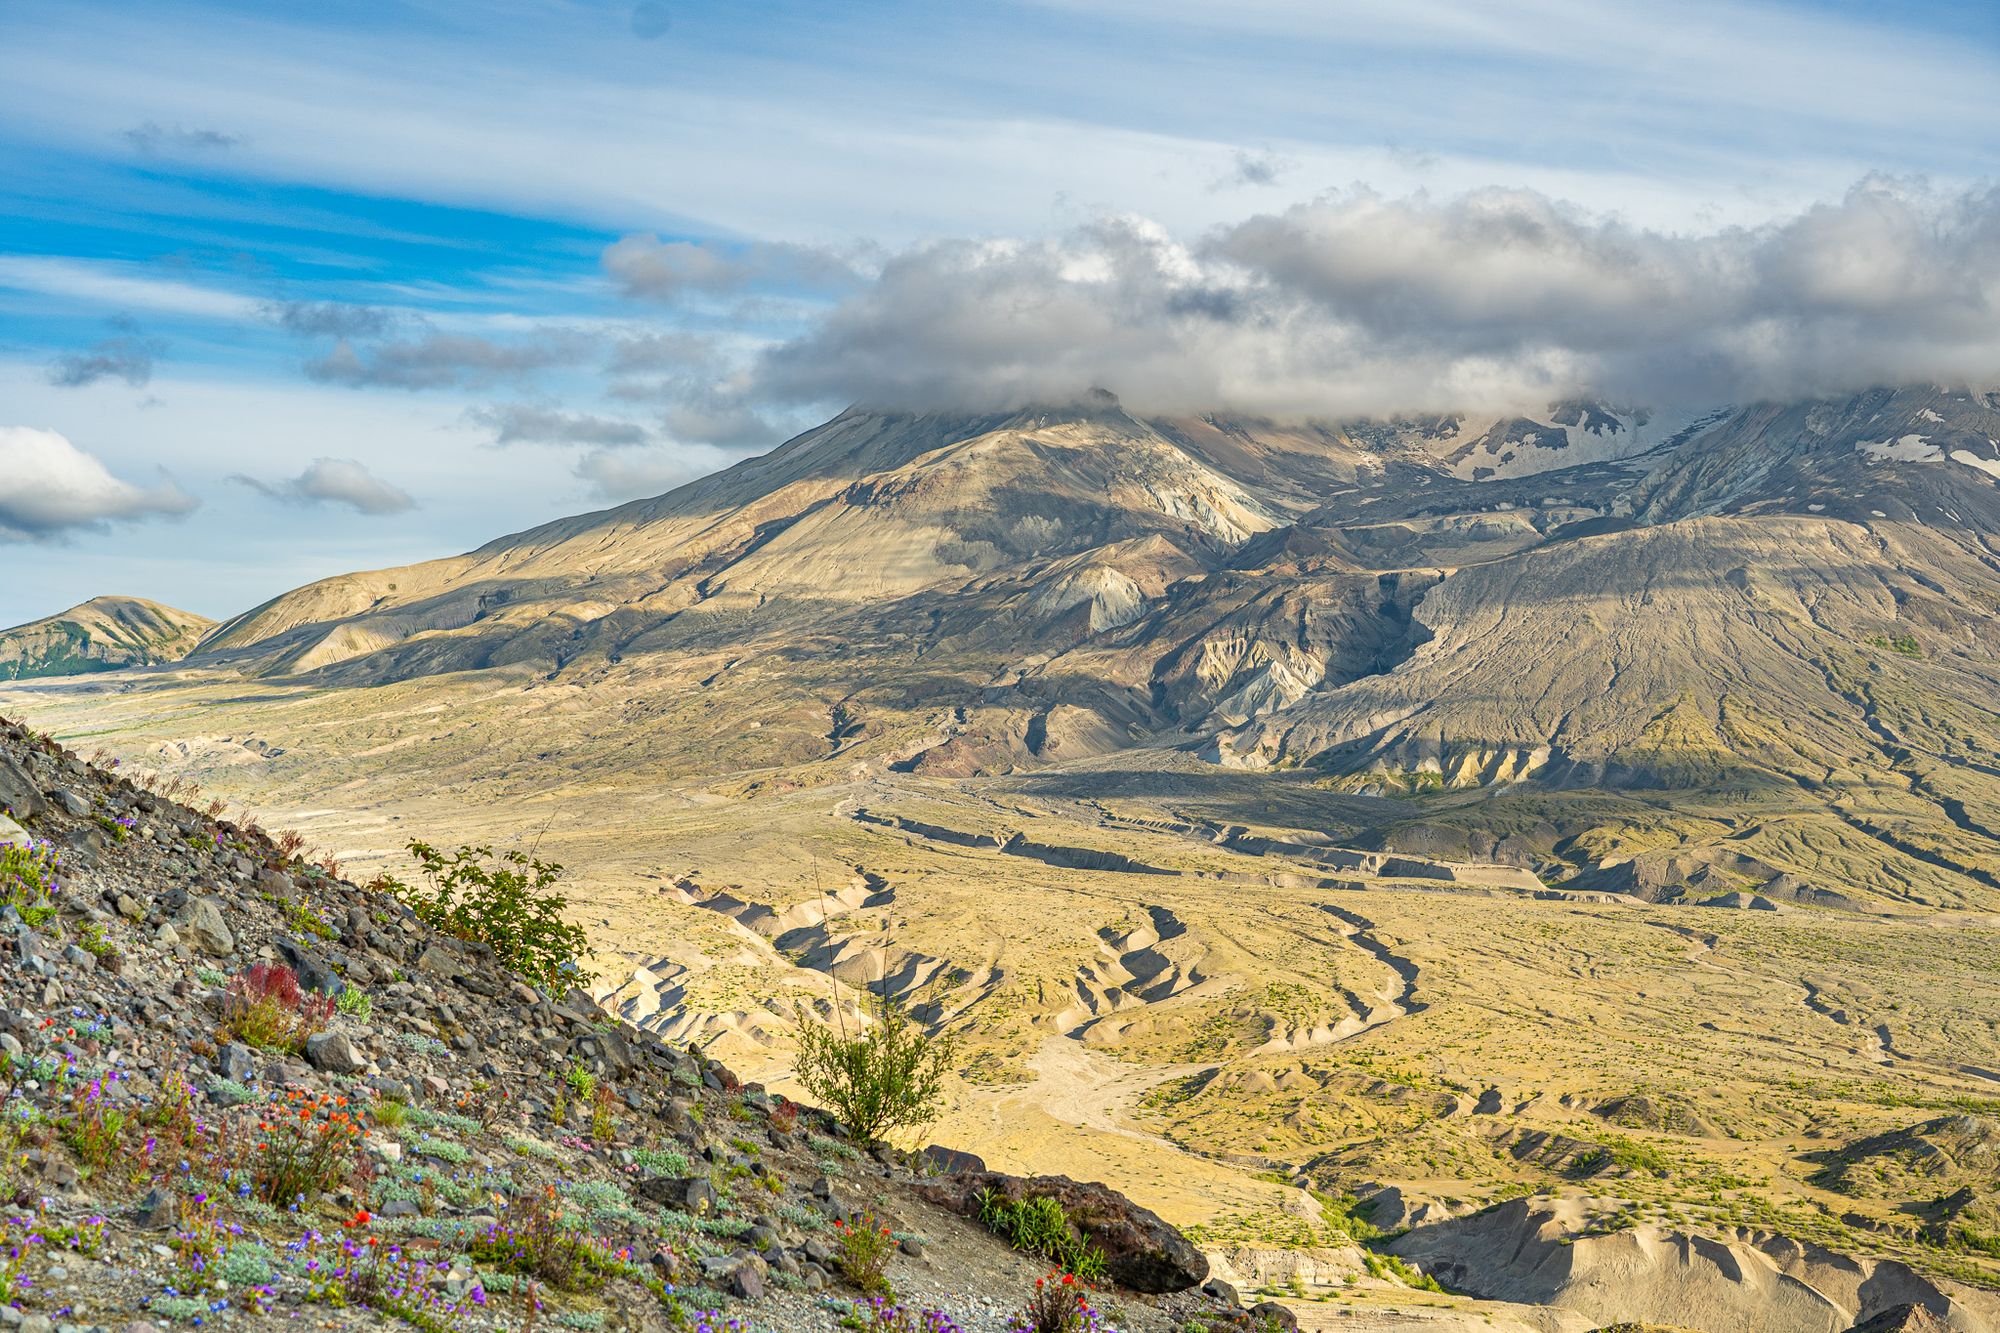 Mount St. Helens crater